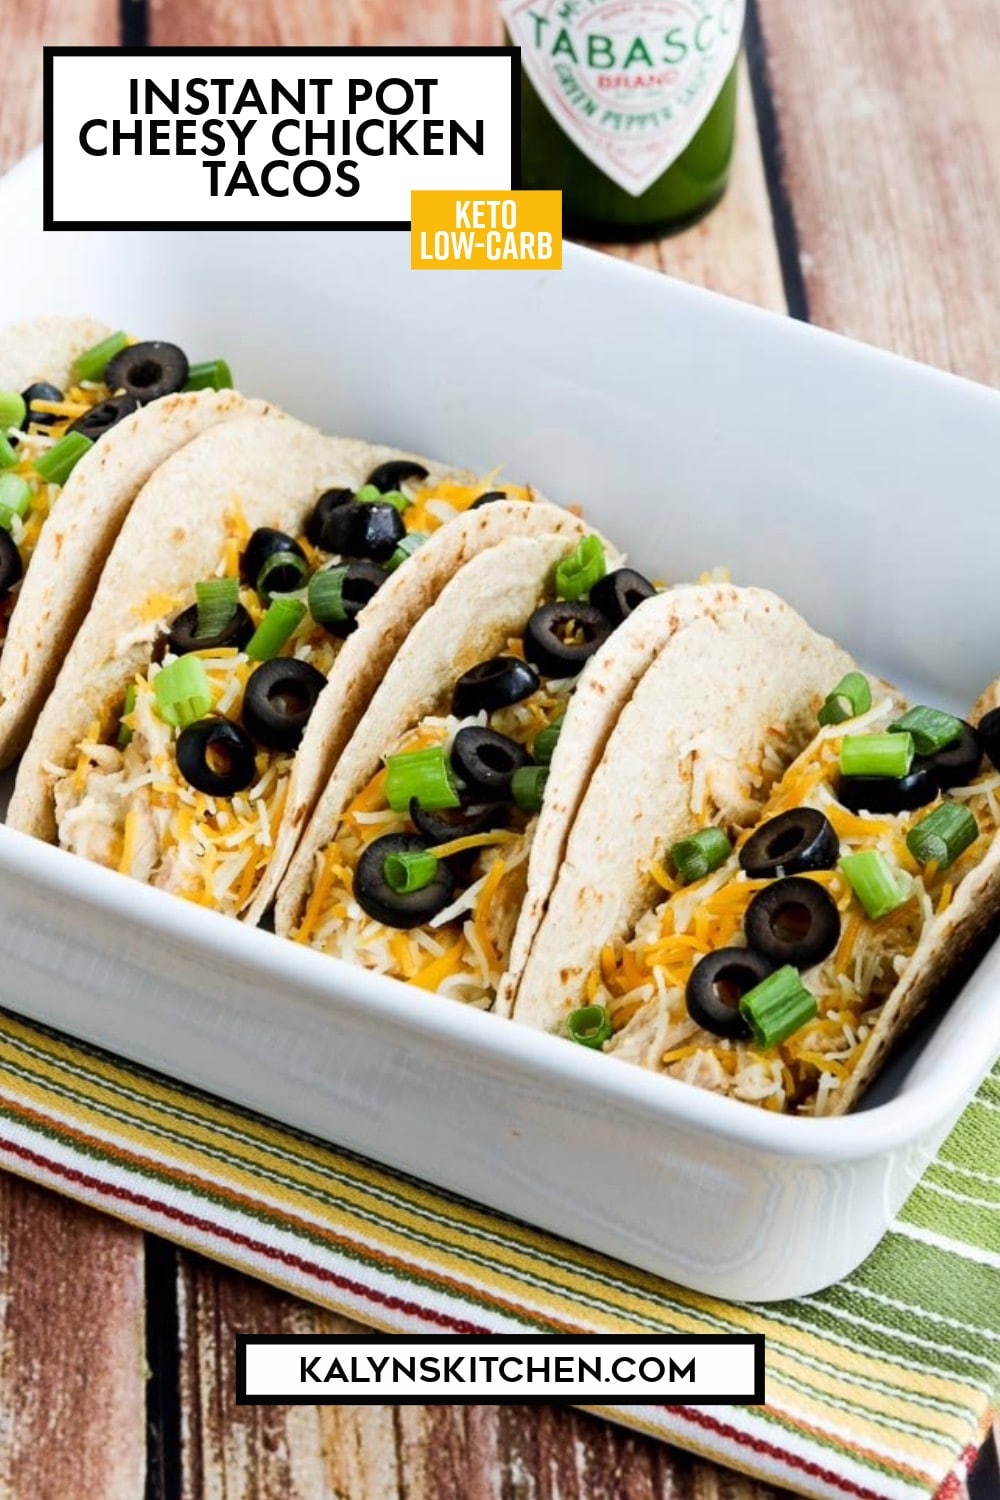 Pinterest image of Instant Pot Cheesy Chicken Tacos